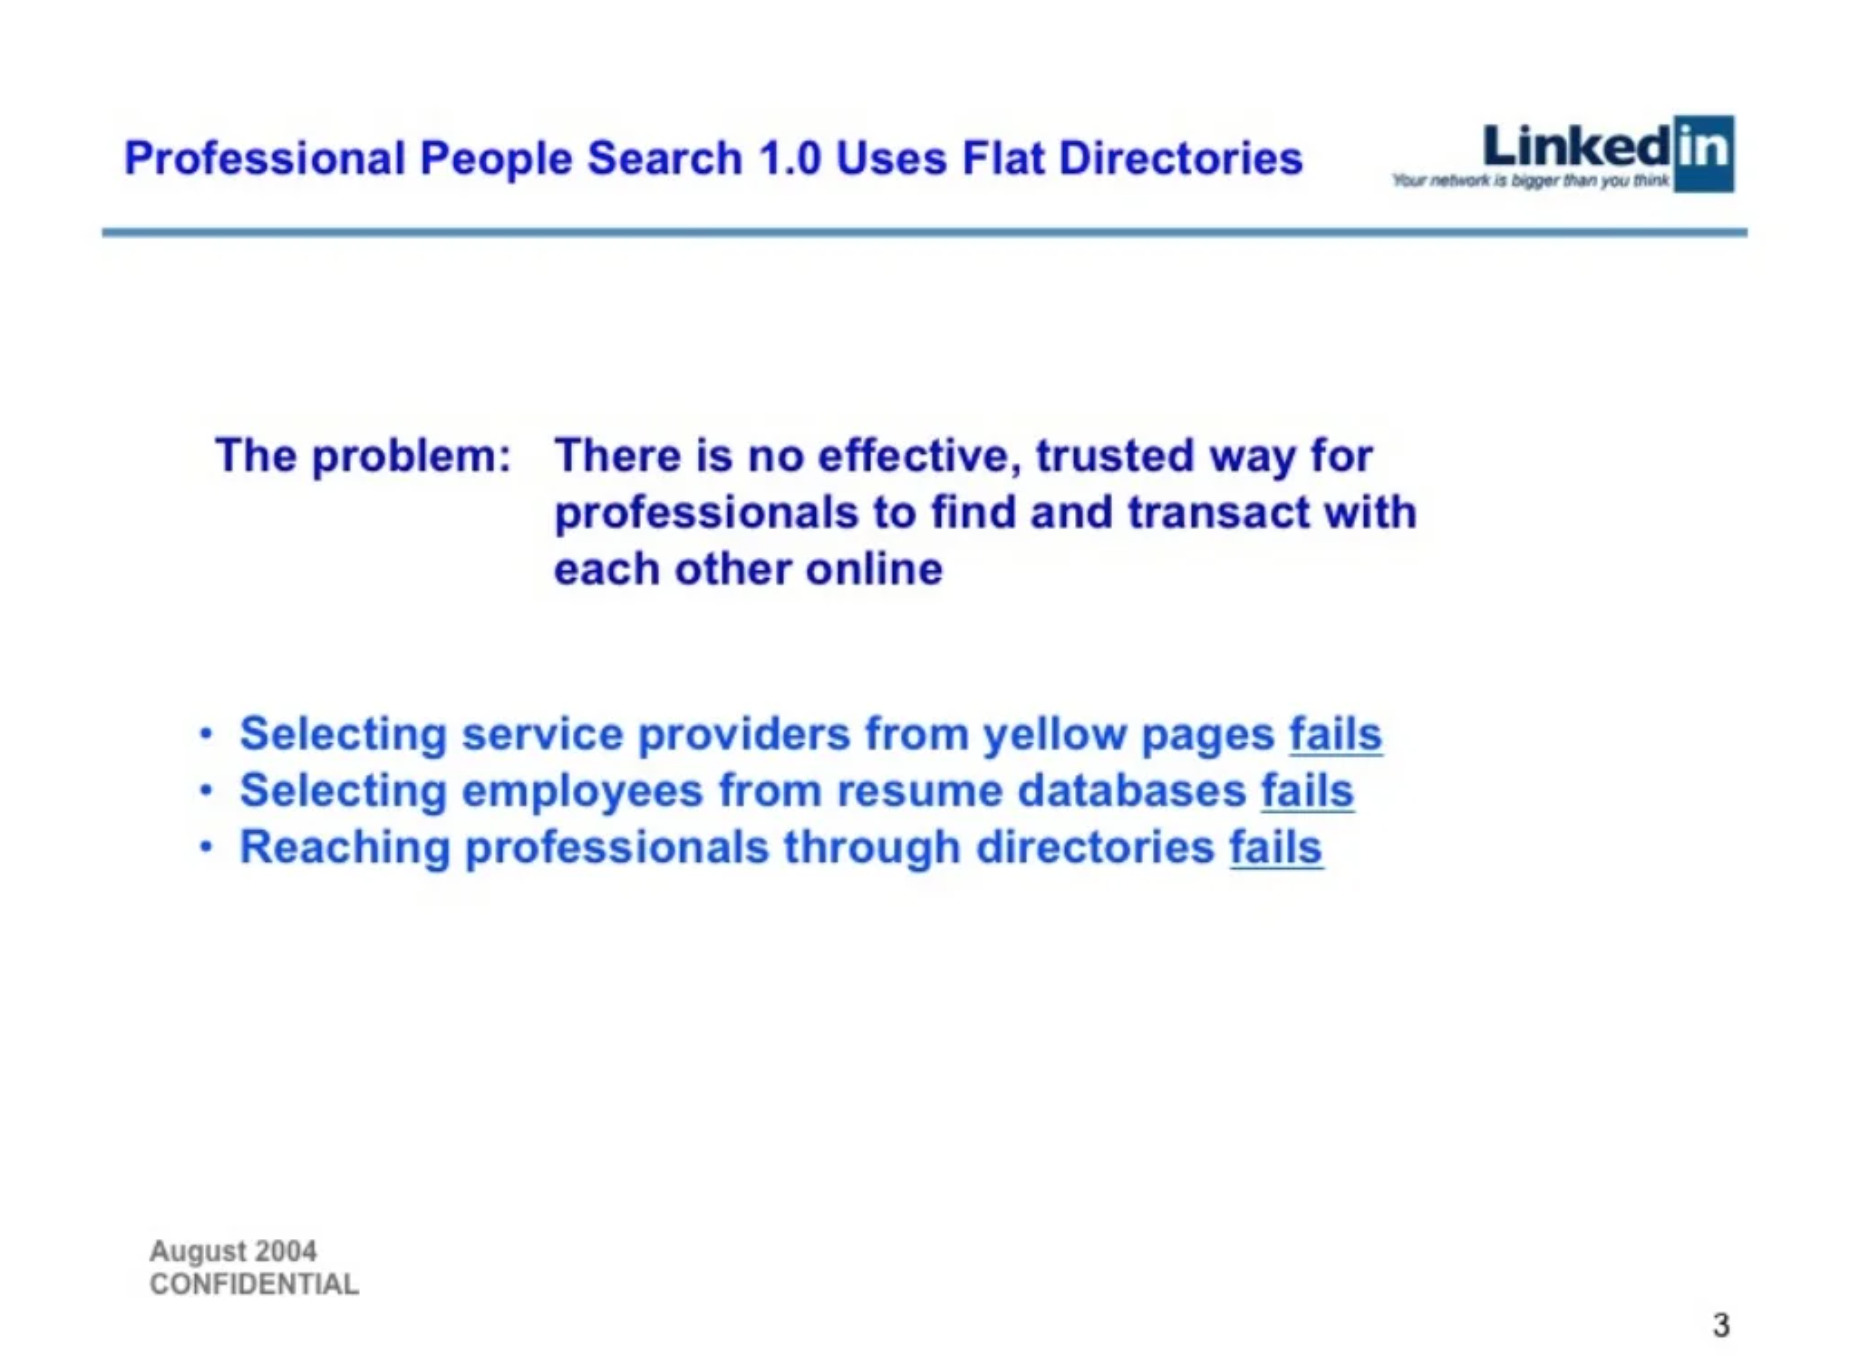 Excerpt from LinkedIn's pitch deck